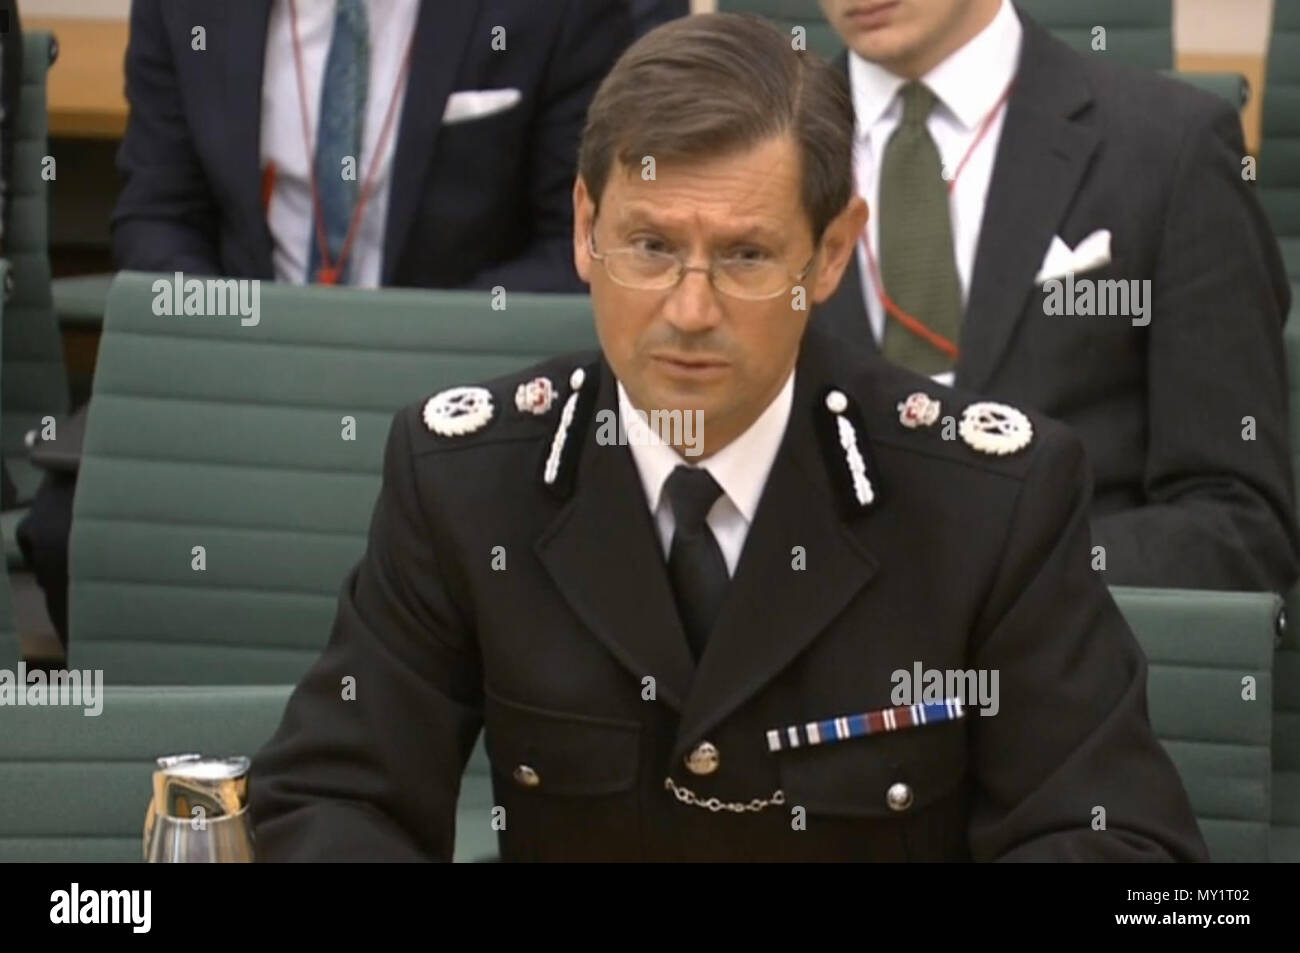 Chief Constable Nick Ephgrave of the National Police Chief's Council gives evidence to the Commons Justice Committee at the Palace of Westminster, London, on disclosure of evidence in criminal cases. Stock Photo